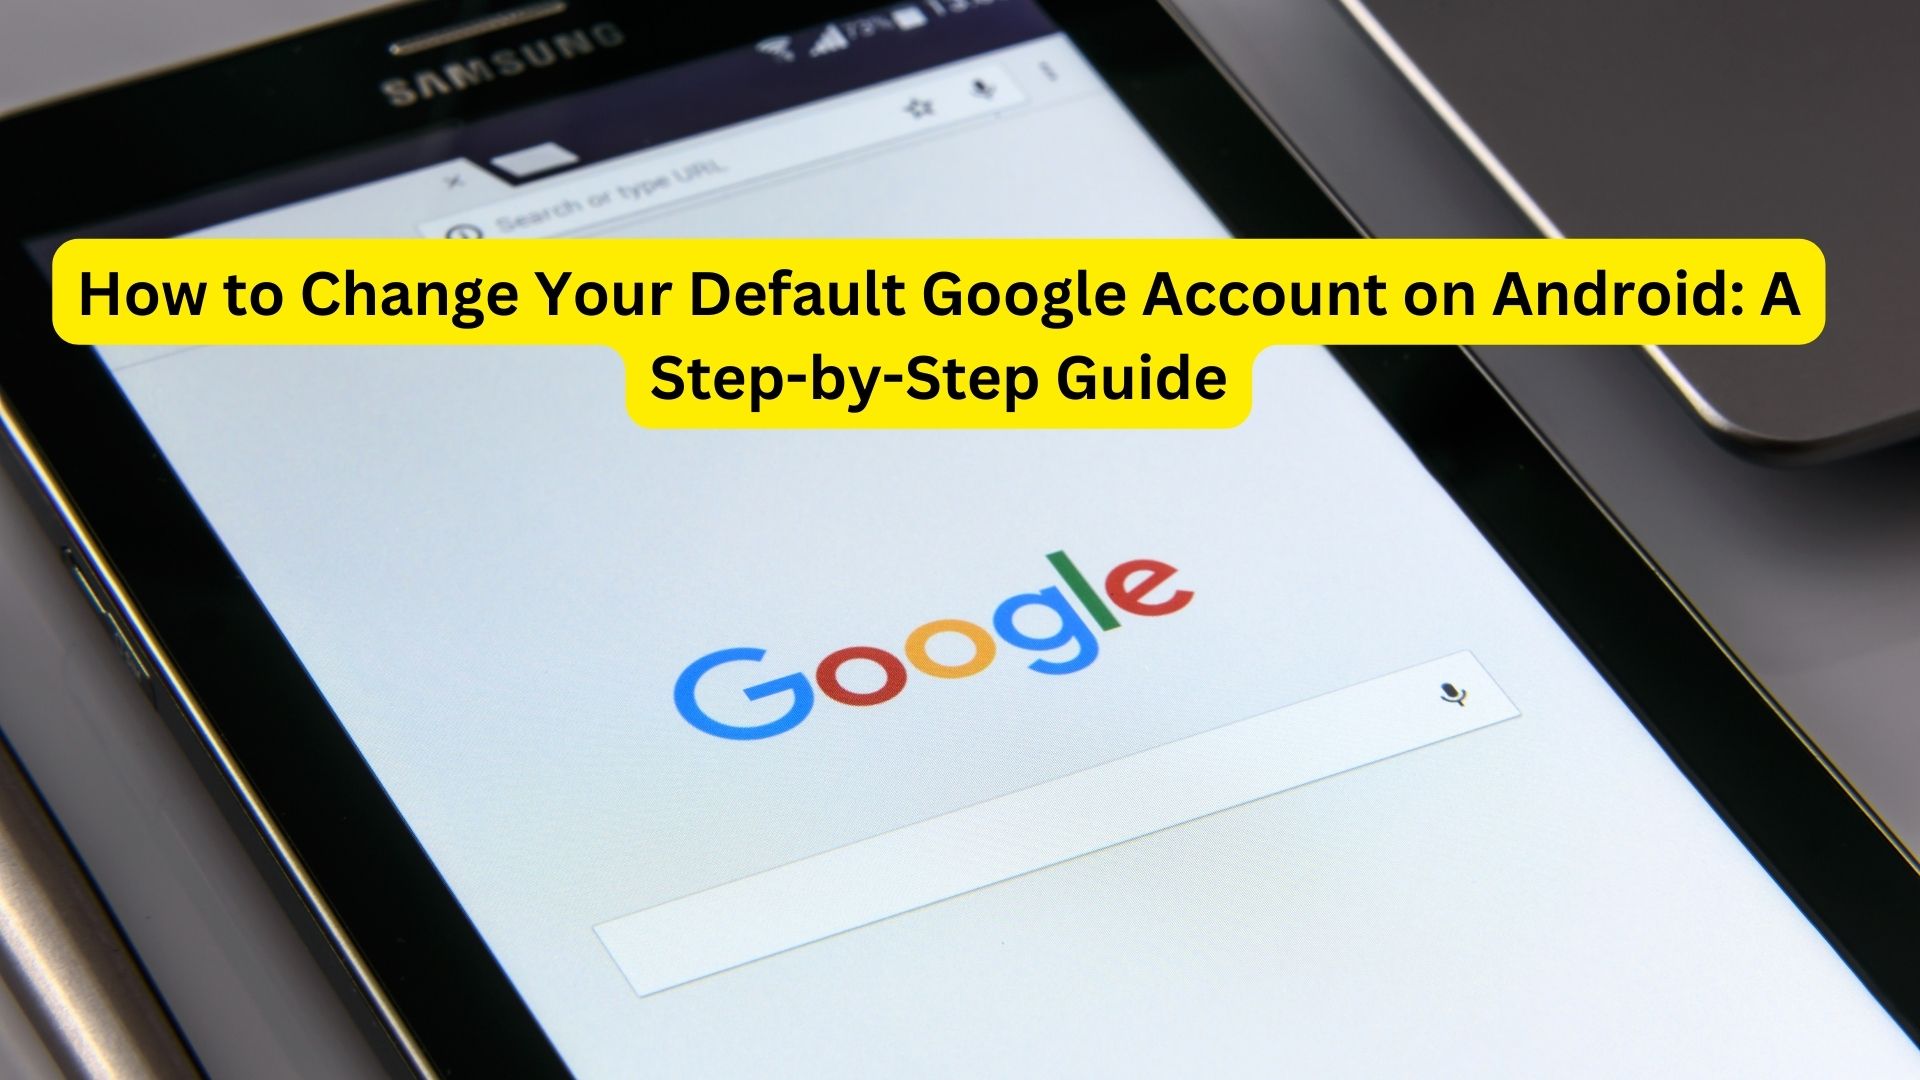 How to Change Your Default Google Account on Android: A Step-by-Step Guide